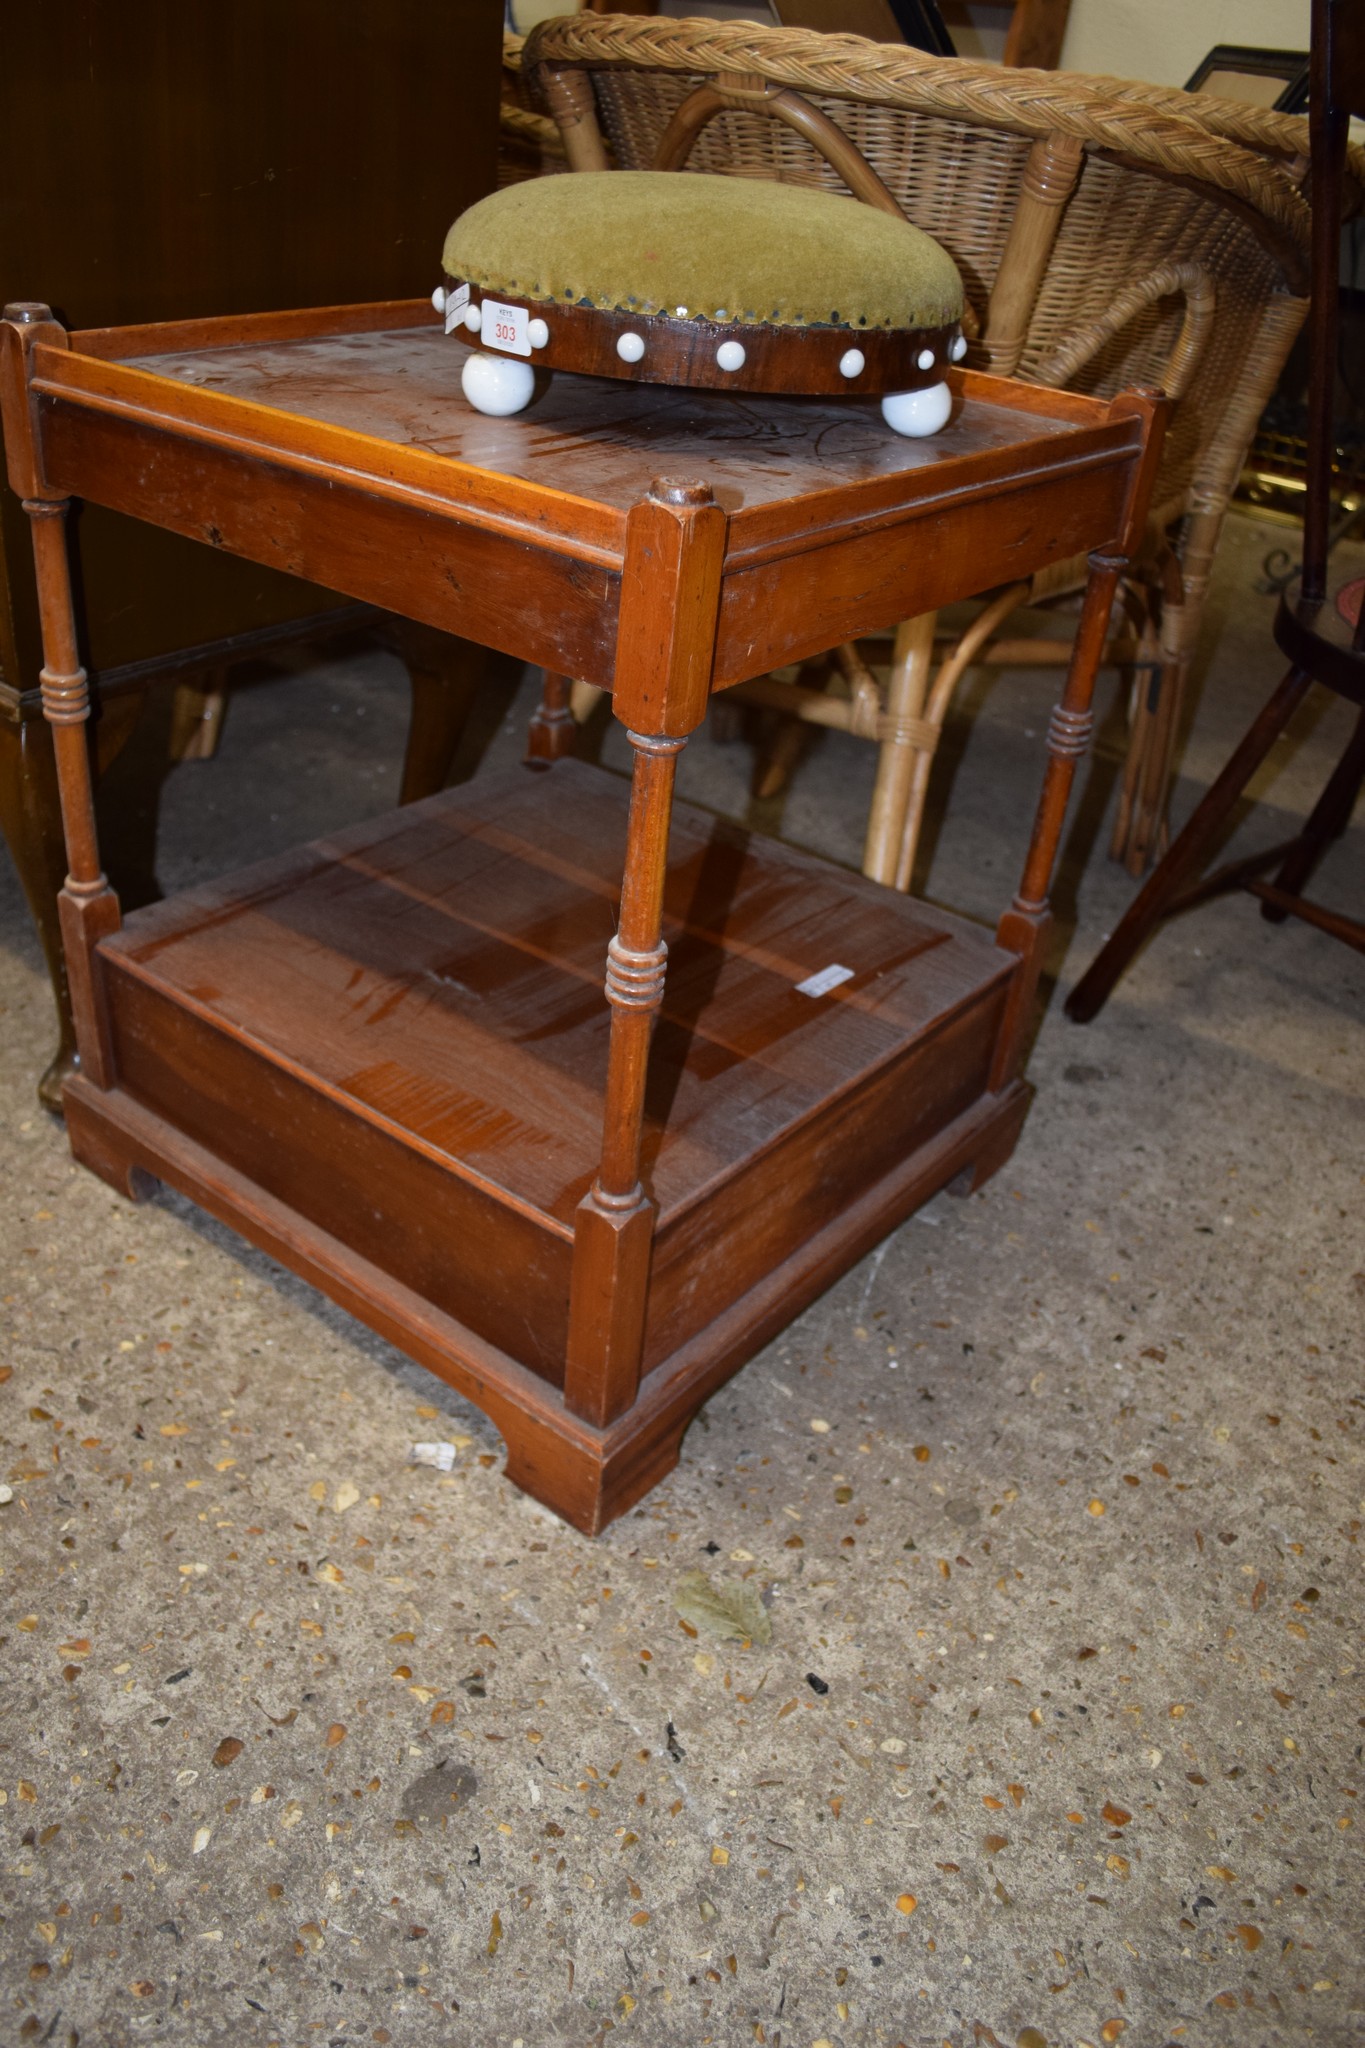 REPRODUCTION TWO-TIER SIDE TABLE, 46CM WIDE